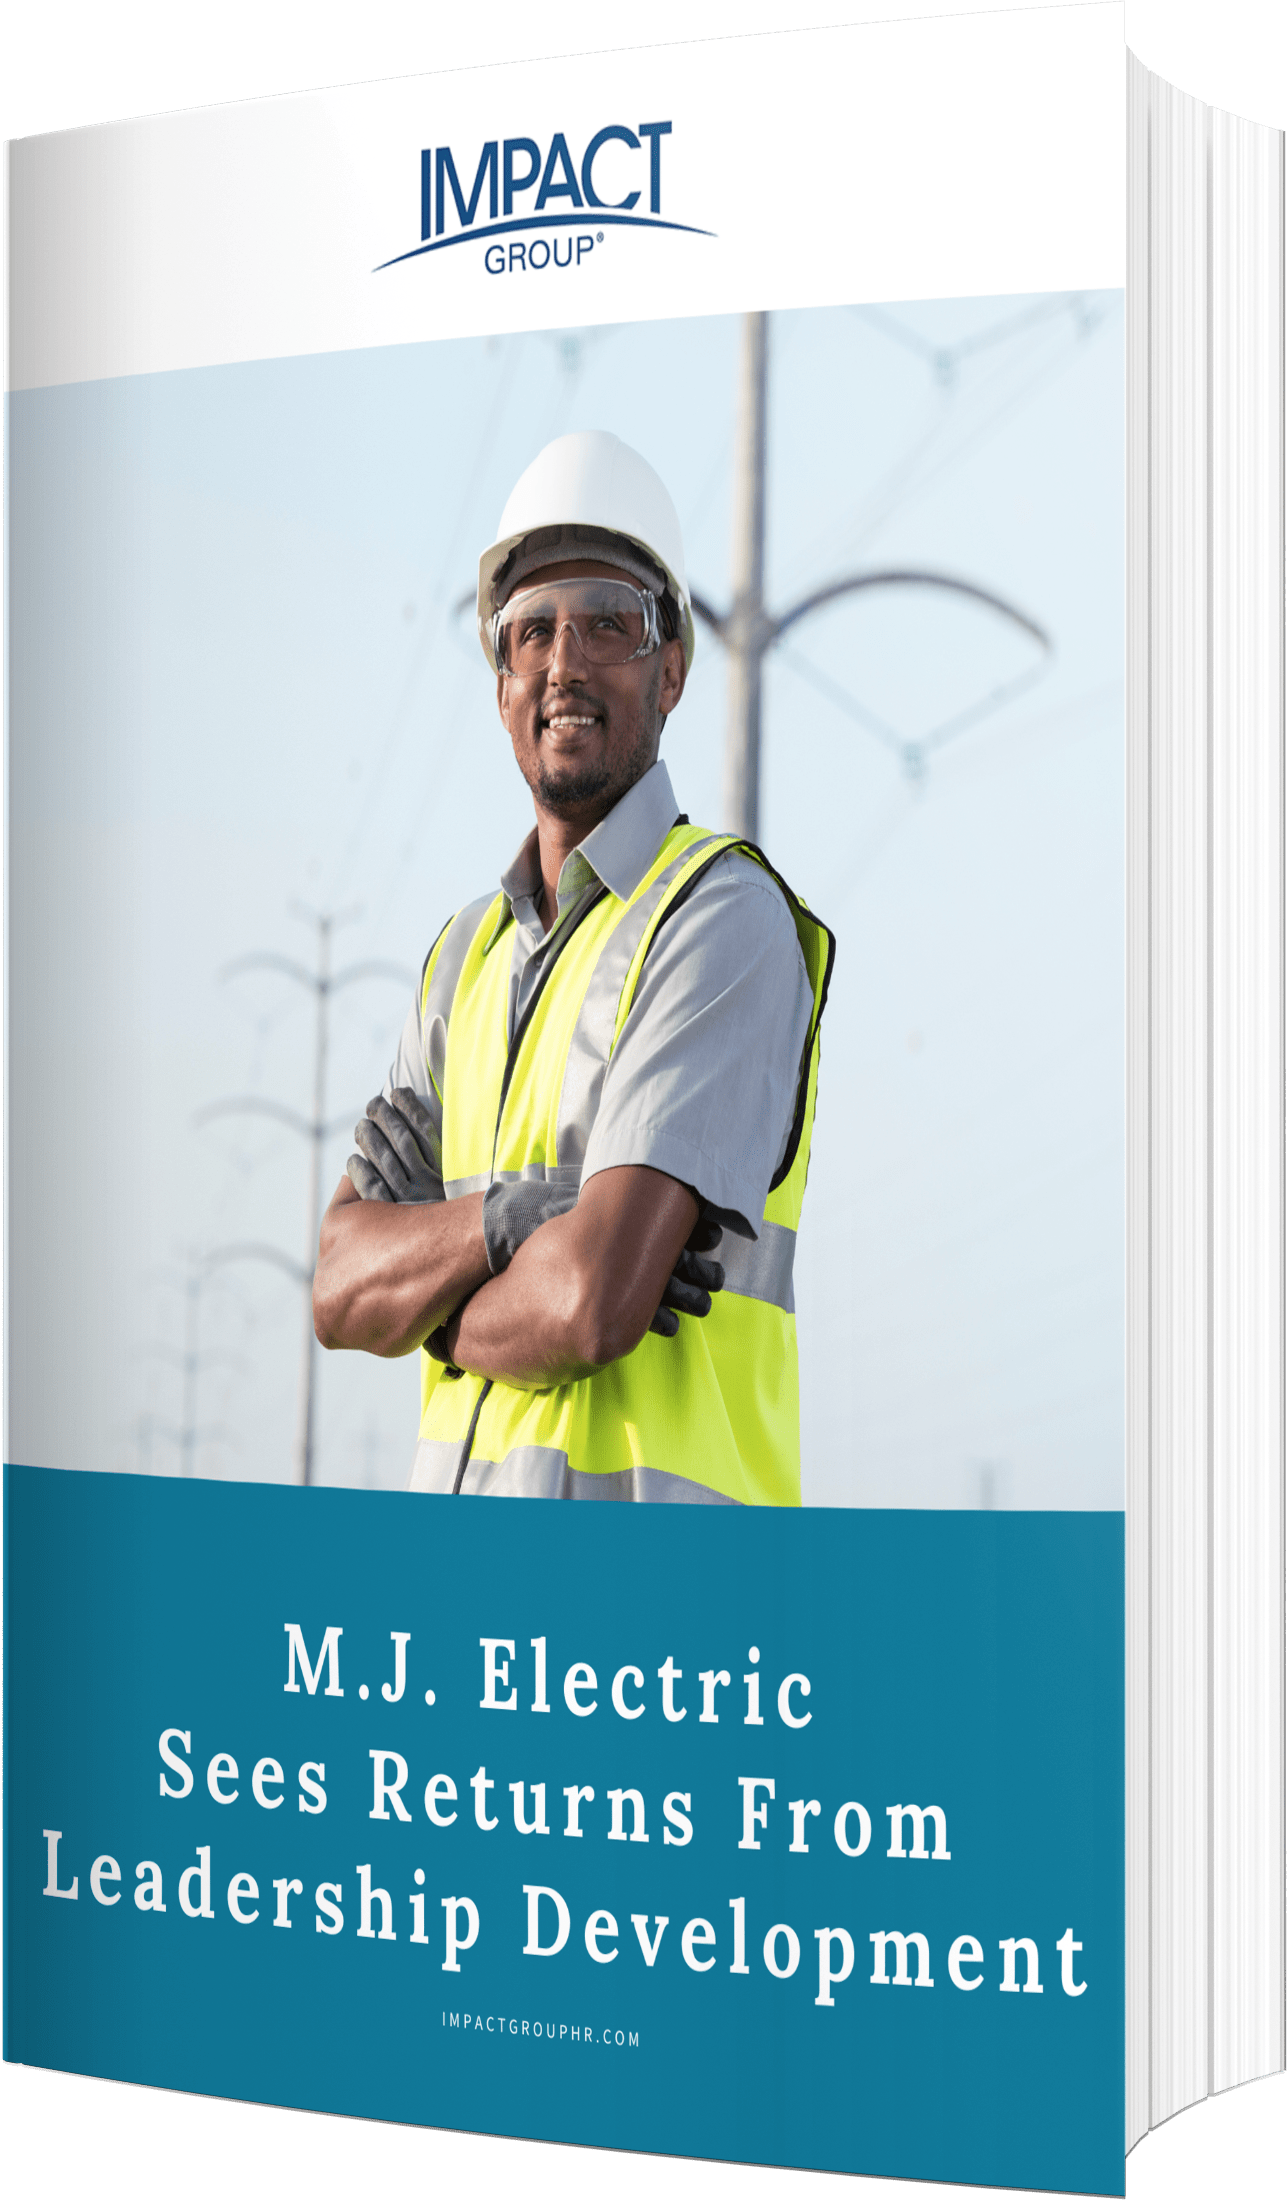 MJ Electric Leadership Case Study, IMPACT Group